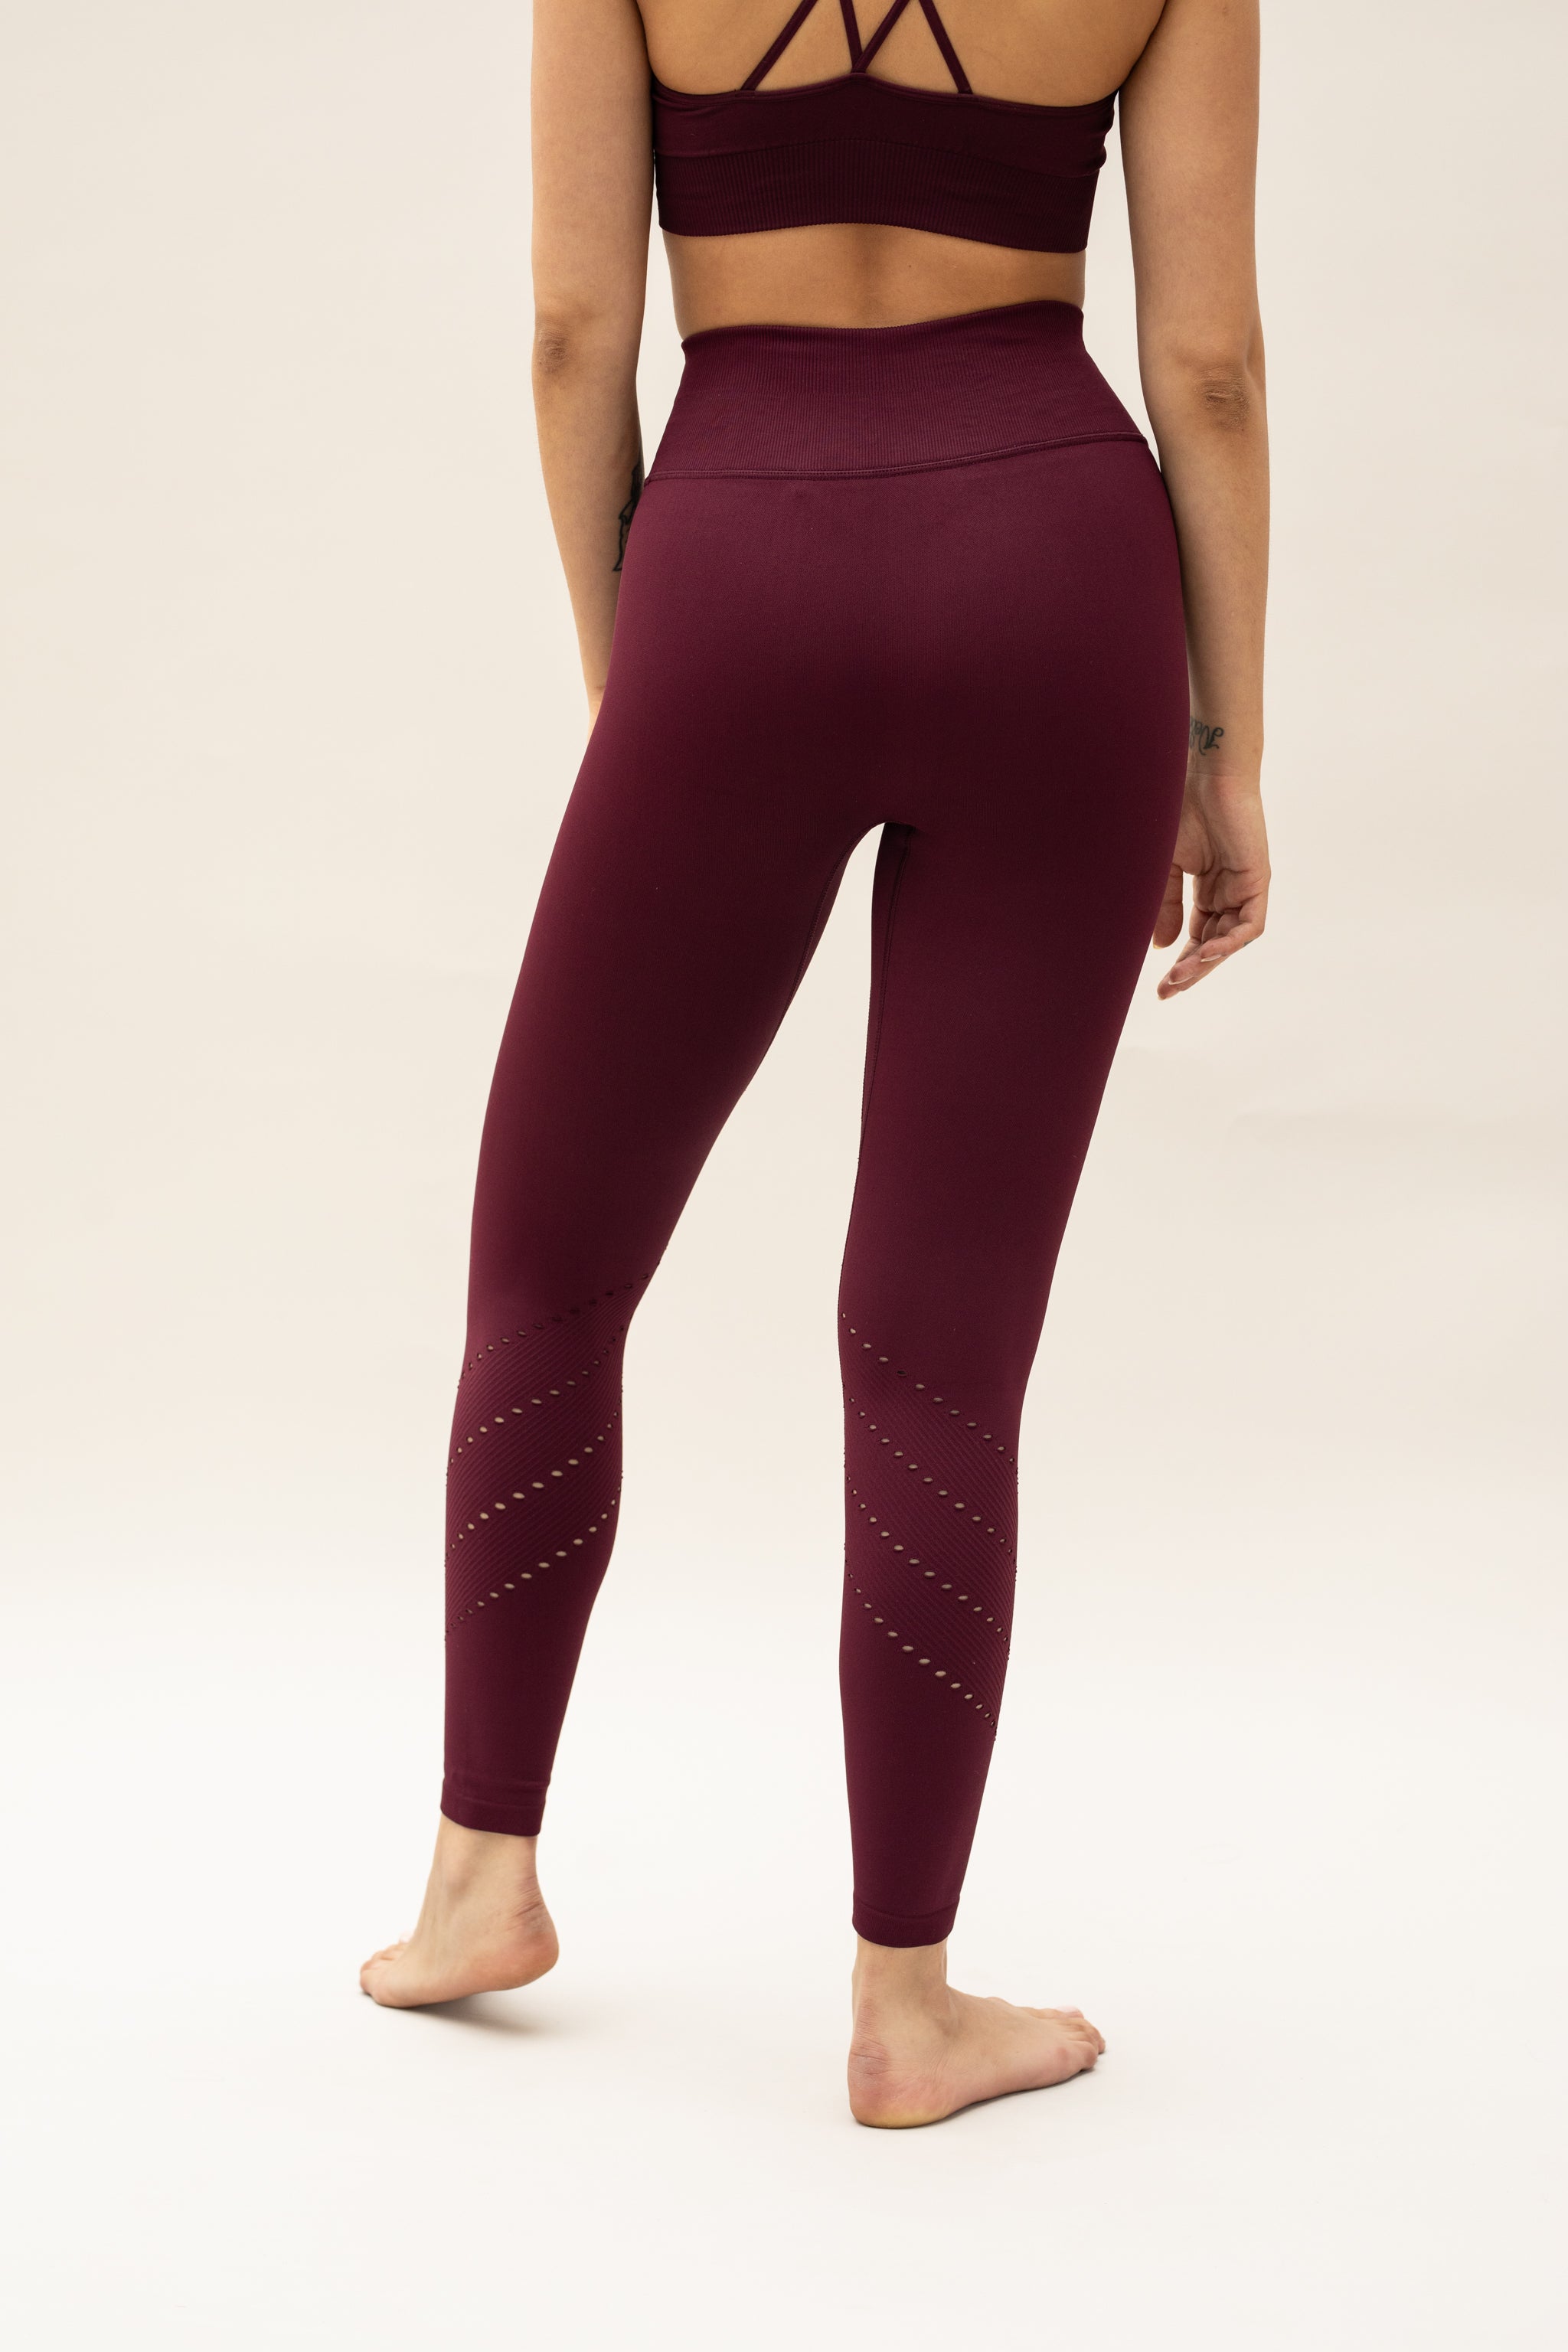 Purple red leggings and purple red bra for women by sustainable activewear brand Jilla. 